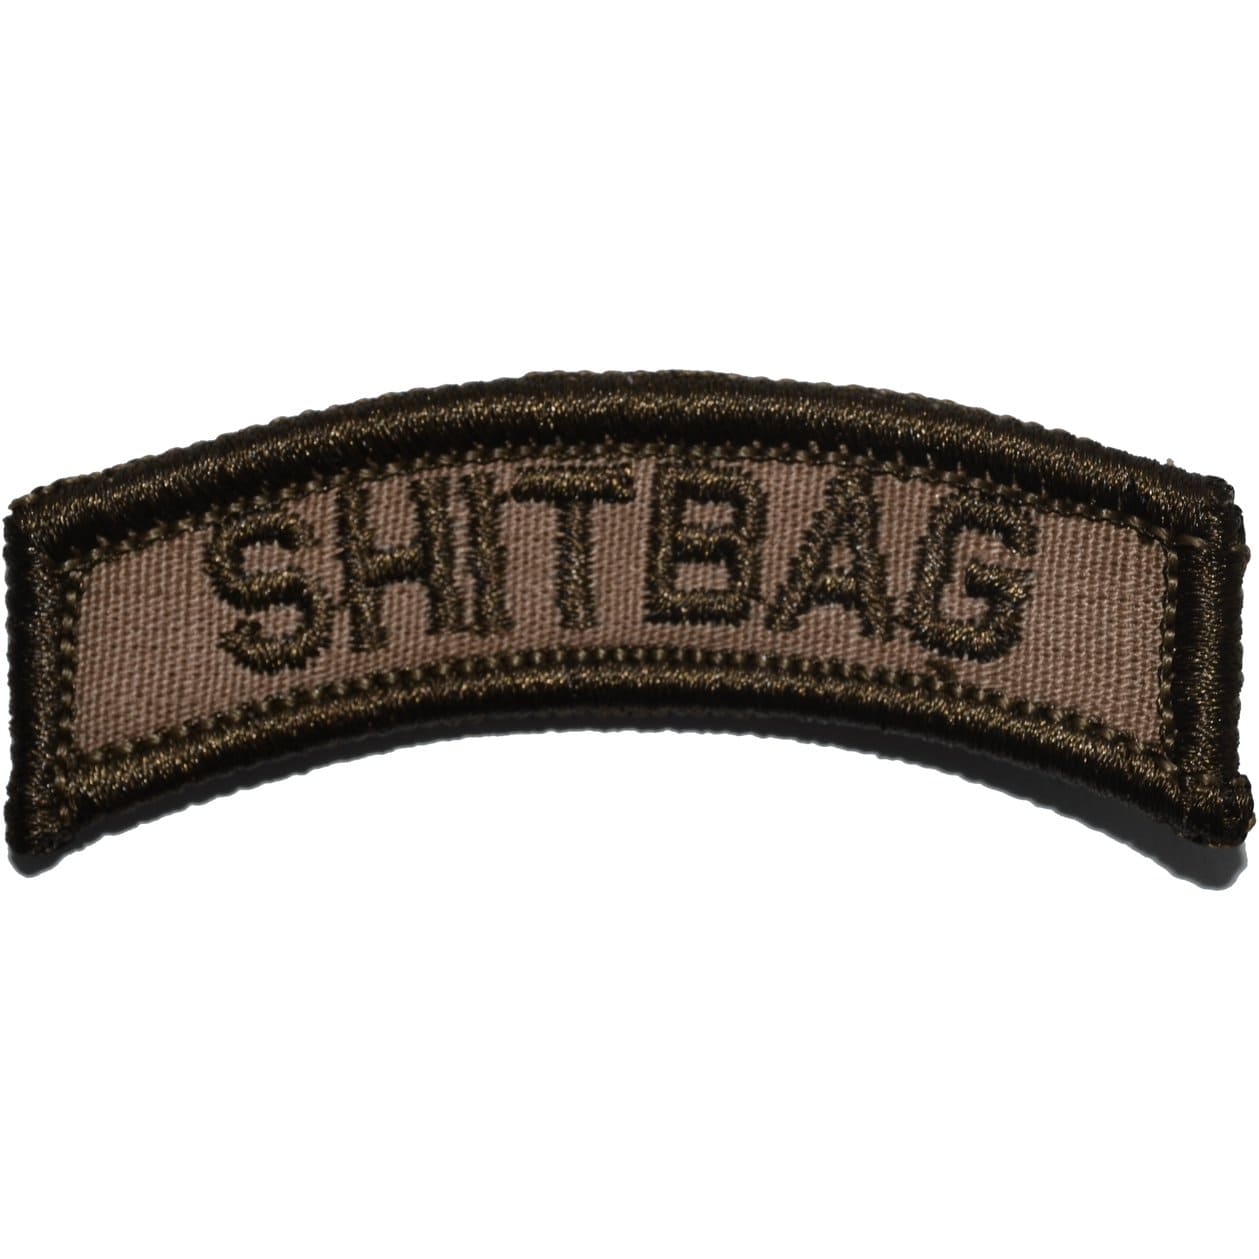 Tactical Gear Junkie Patches Coyote Brown Shitbag Tab Patch